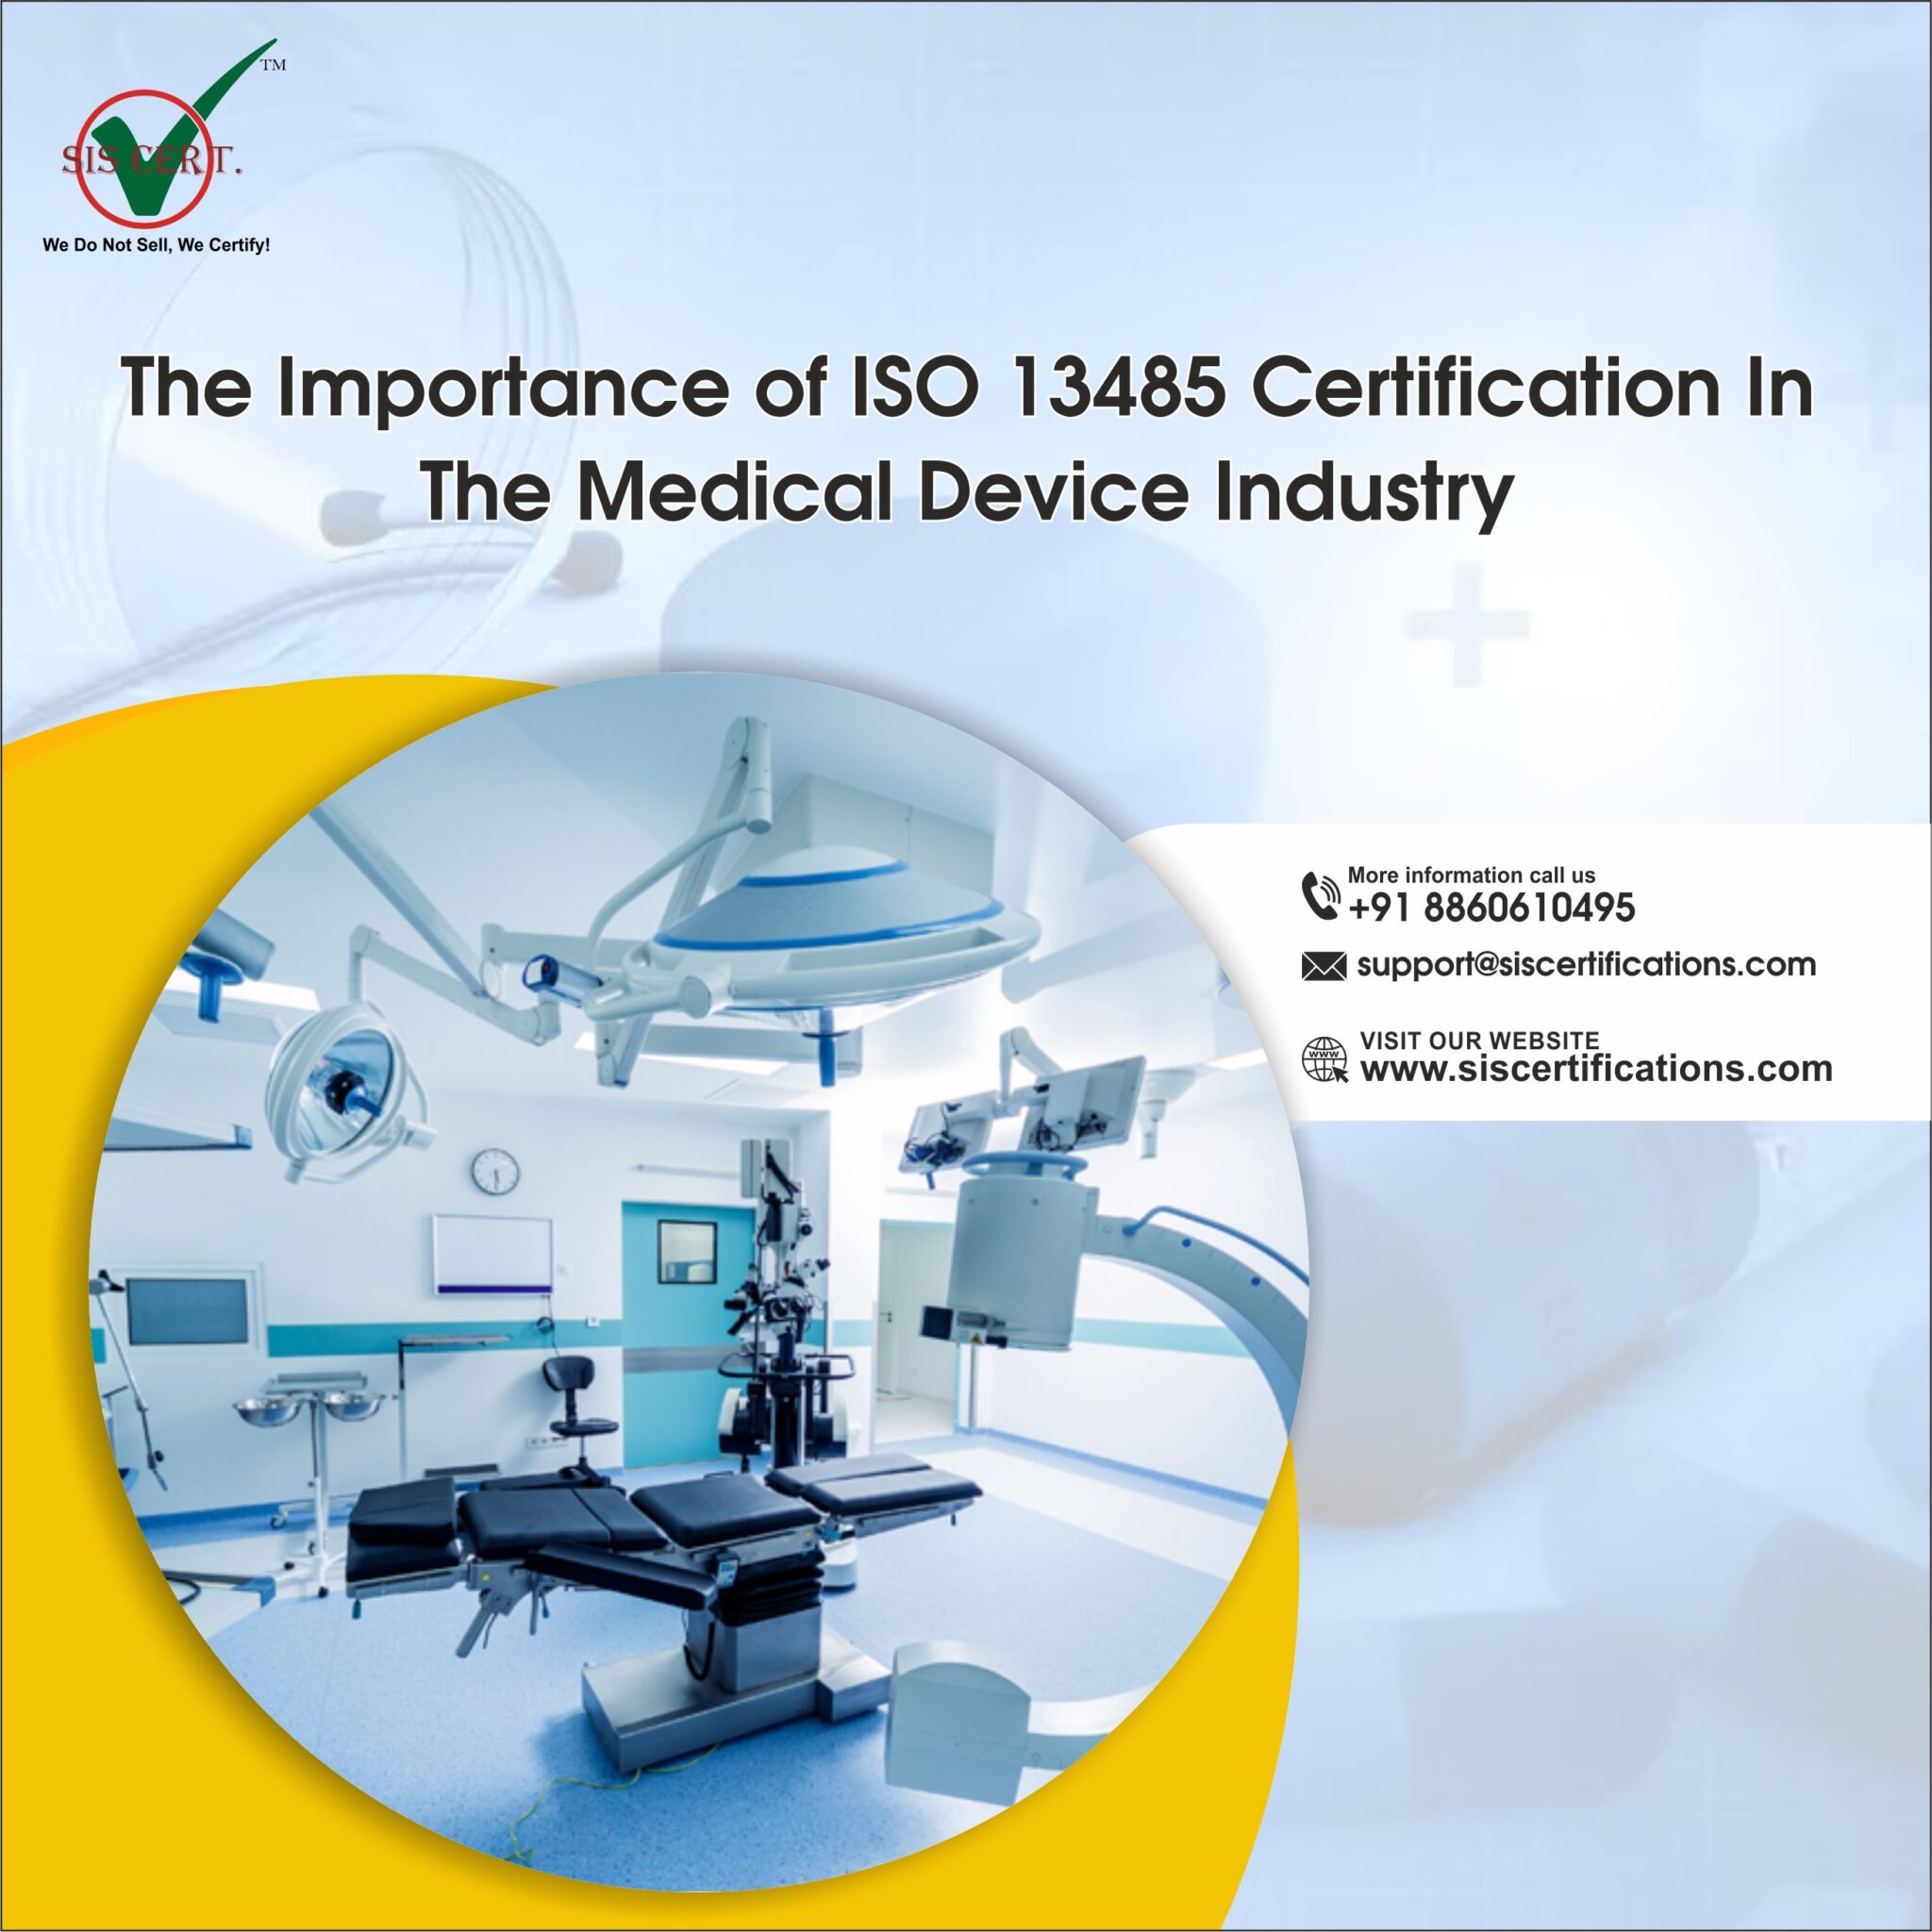 The Importance of ISO 13485 Certification in The Medical Device Industry